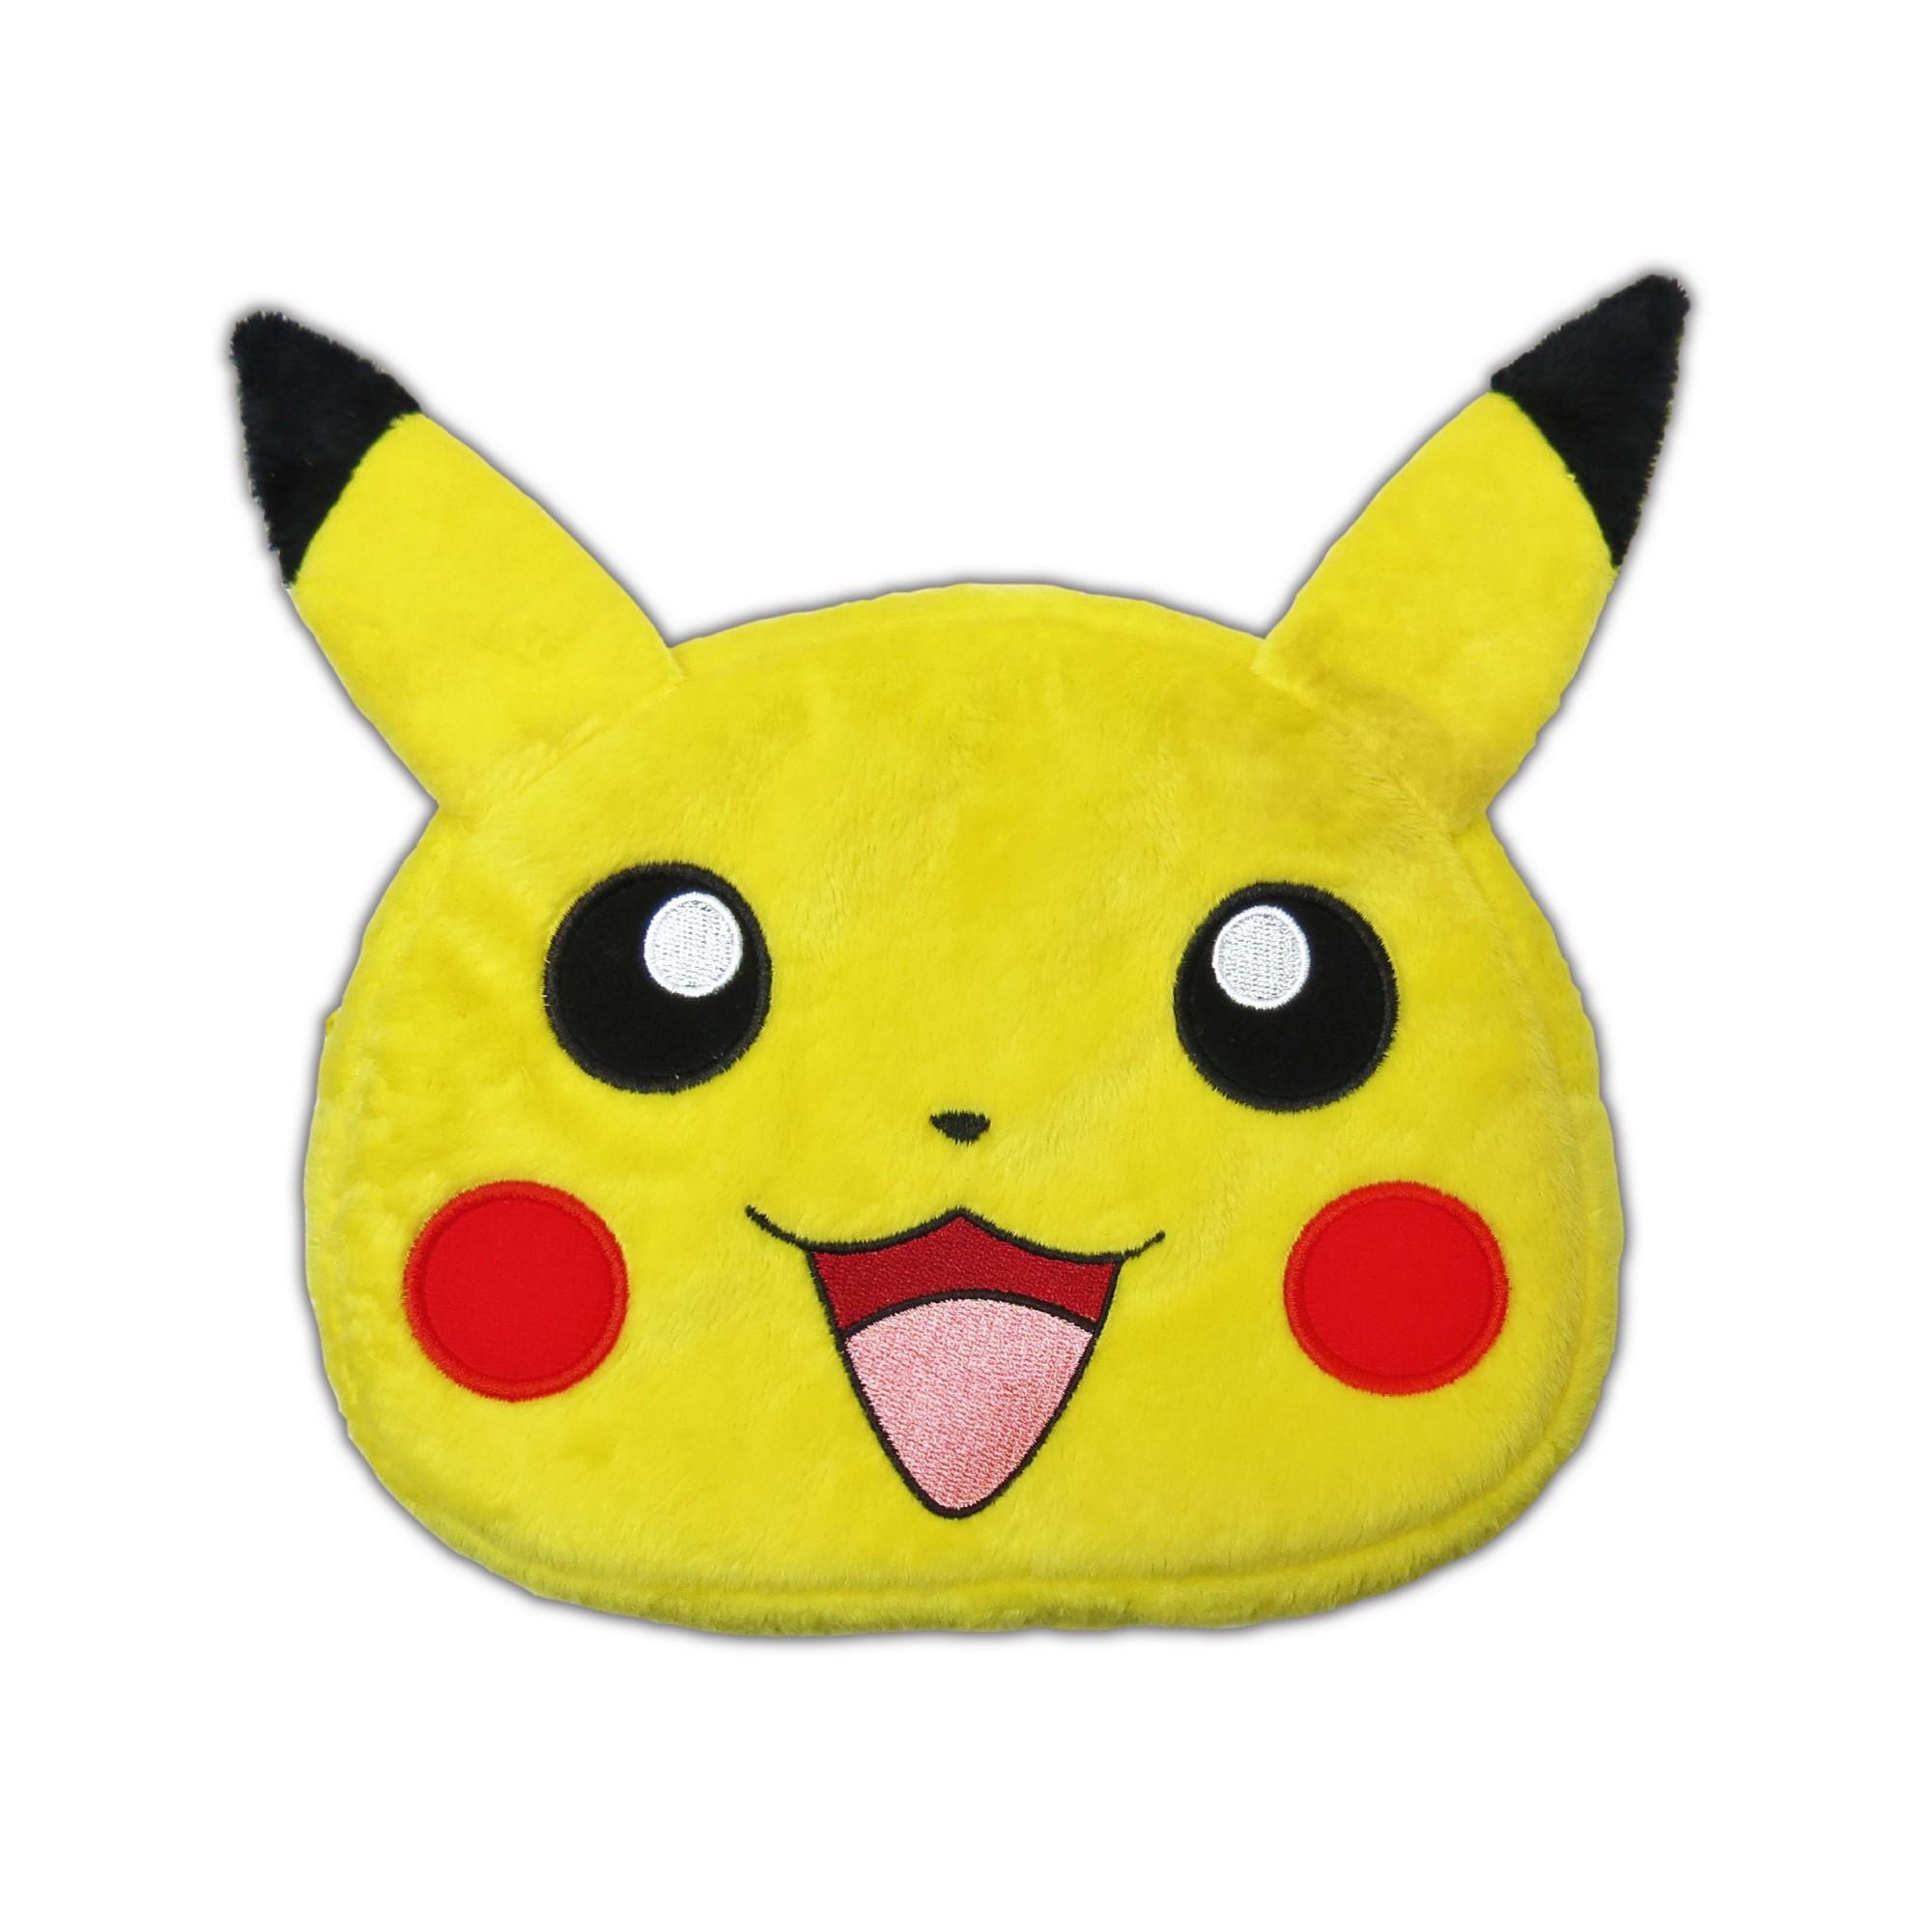 Hori Hori Pikachu Plush Pouch - Opberghoes - 2DS + 3DS